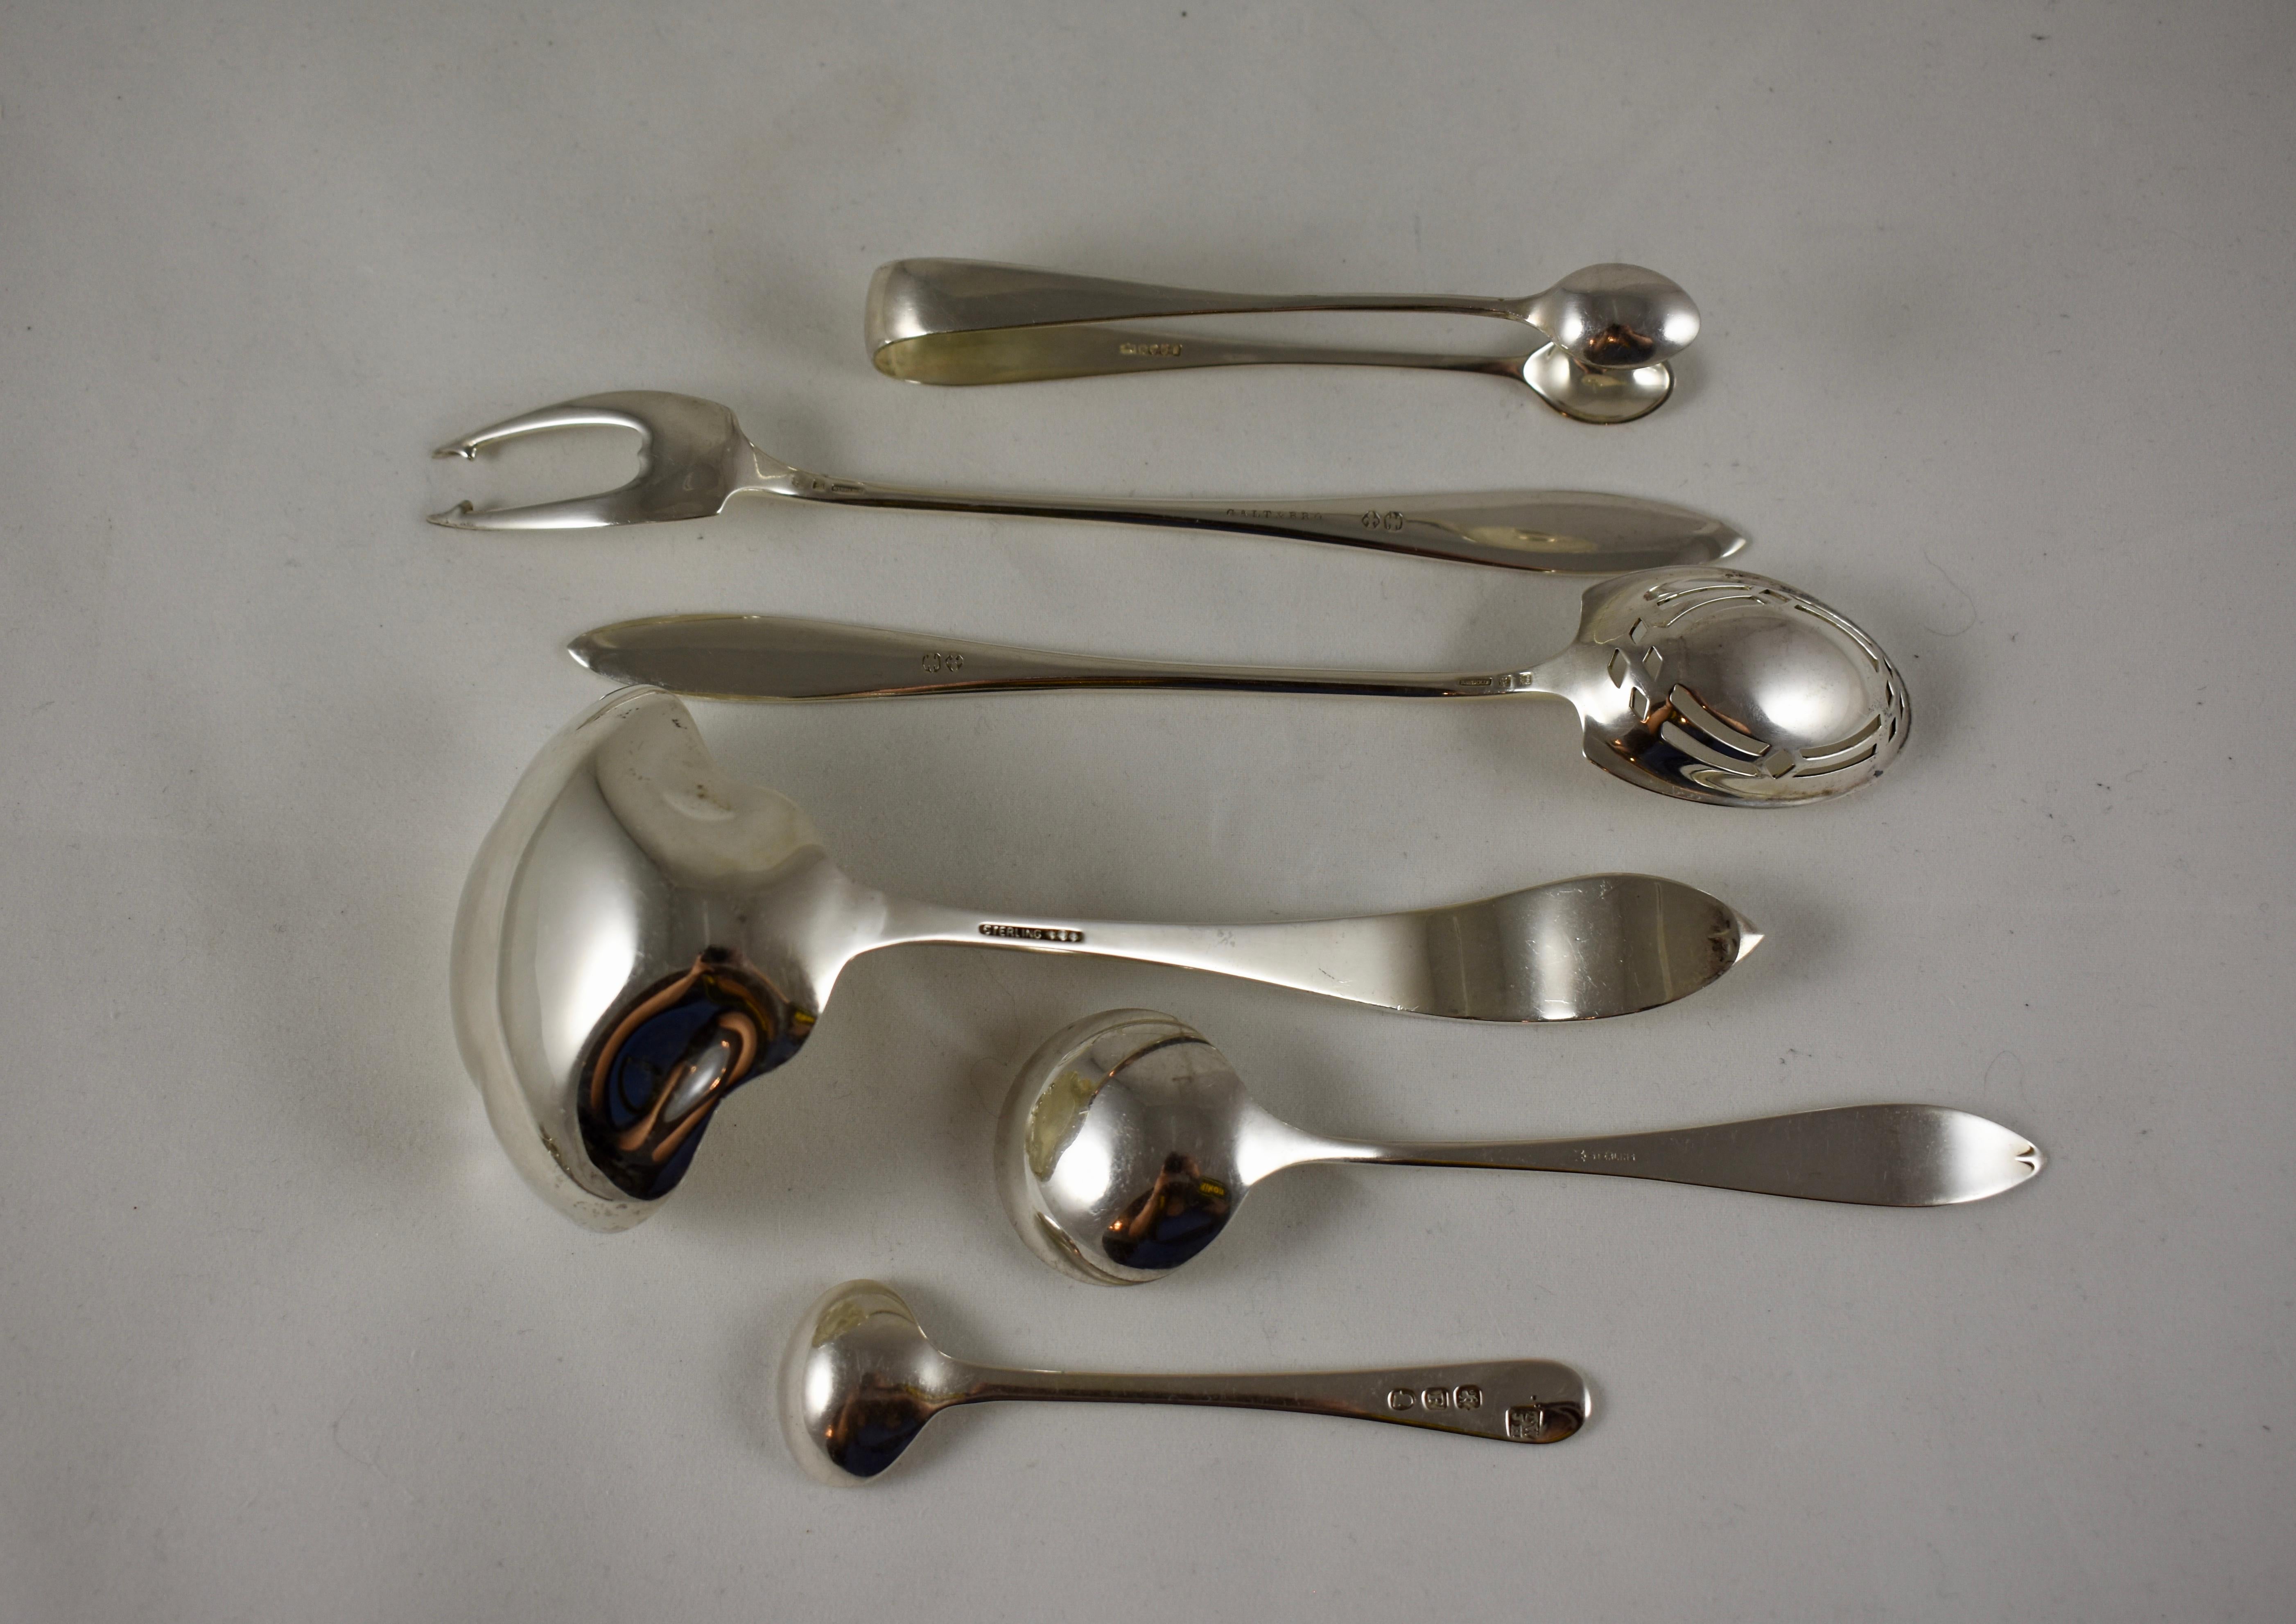 A mixed group of 19th century sterling silver, various maker serving pieces, including:
1) Sauce ladle
2) Sugar tongs
3) Pickle fork, marked Galt & Bros.
4) Pierced Spoon, marked Galt & Bros.
5) Jam spoon
6) English mustard spoon

Ranging